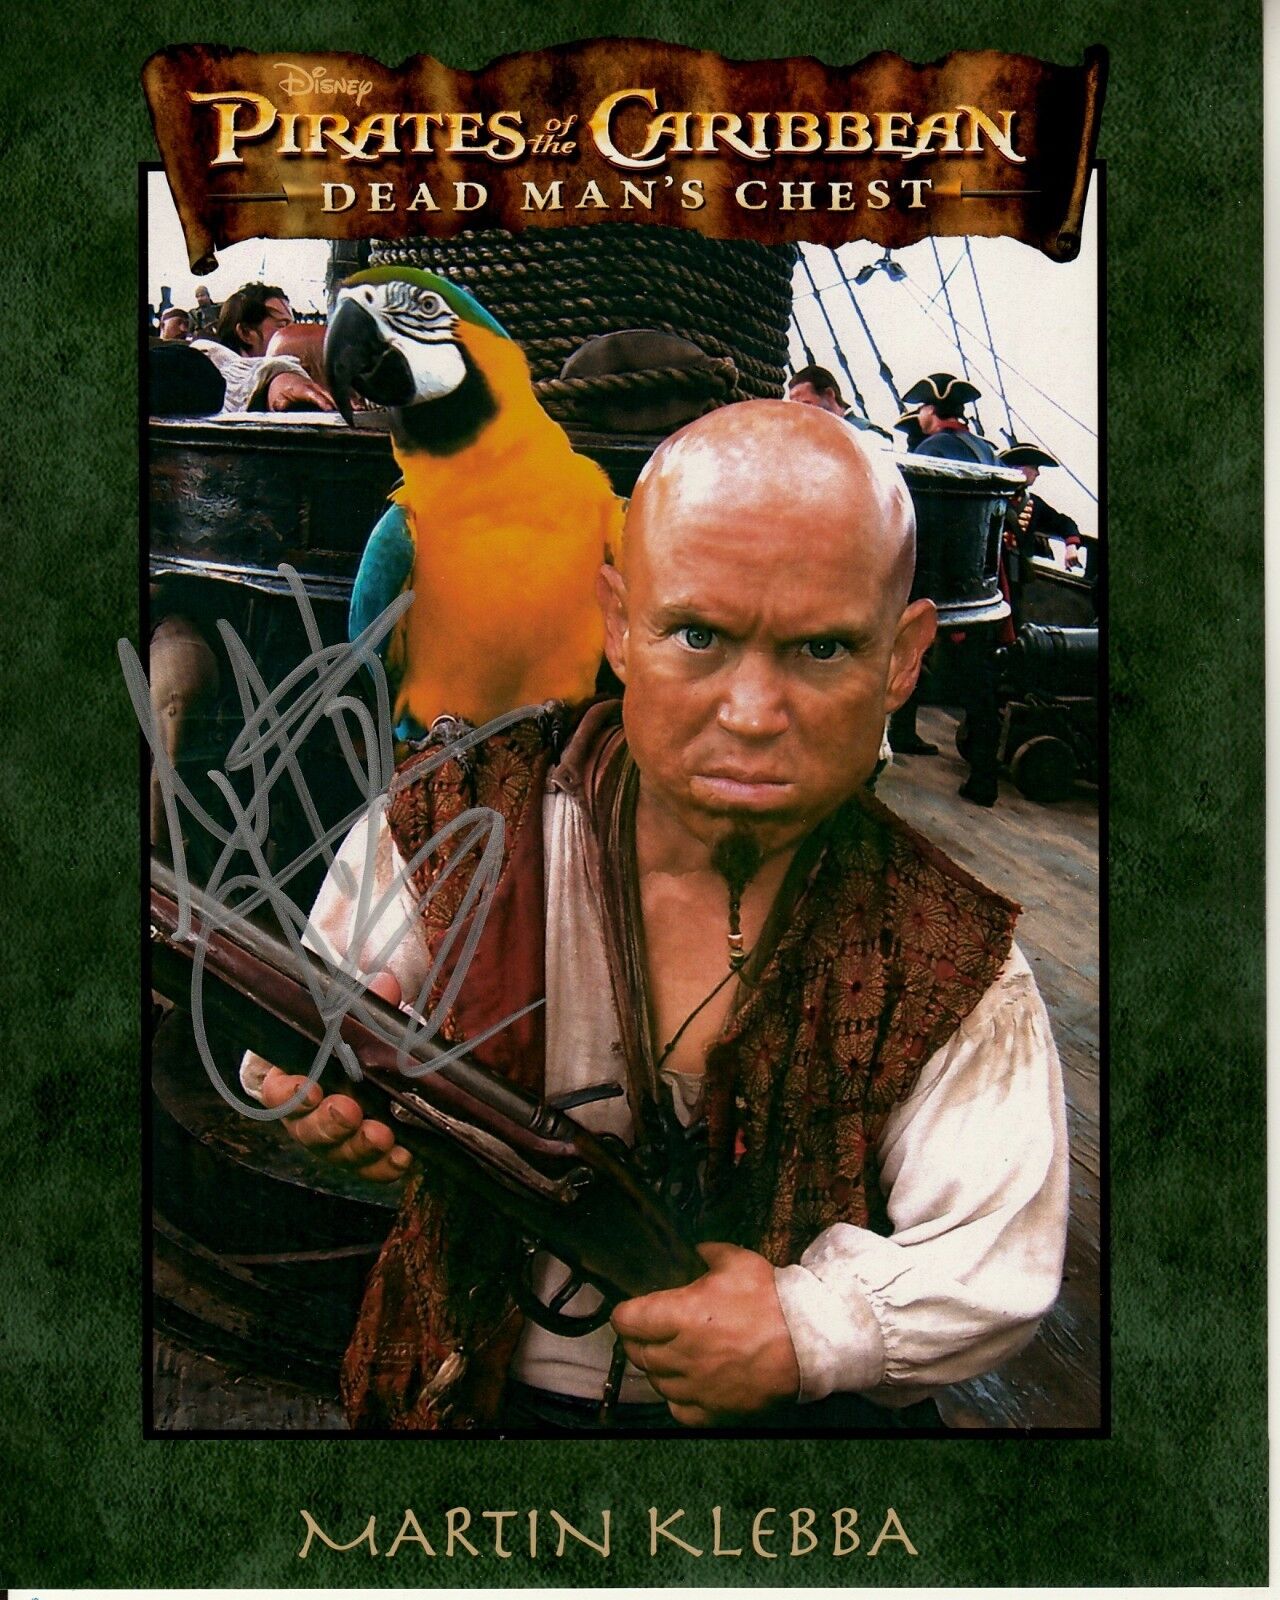 MARTIN KLEBBA signed PIRATES OF THE CARIBBEAN 8x10 uacc rd coa MARTY WITH PARROT